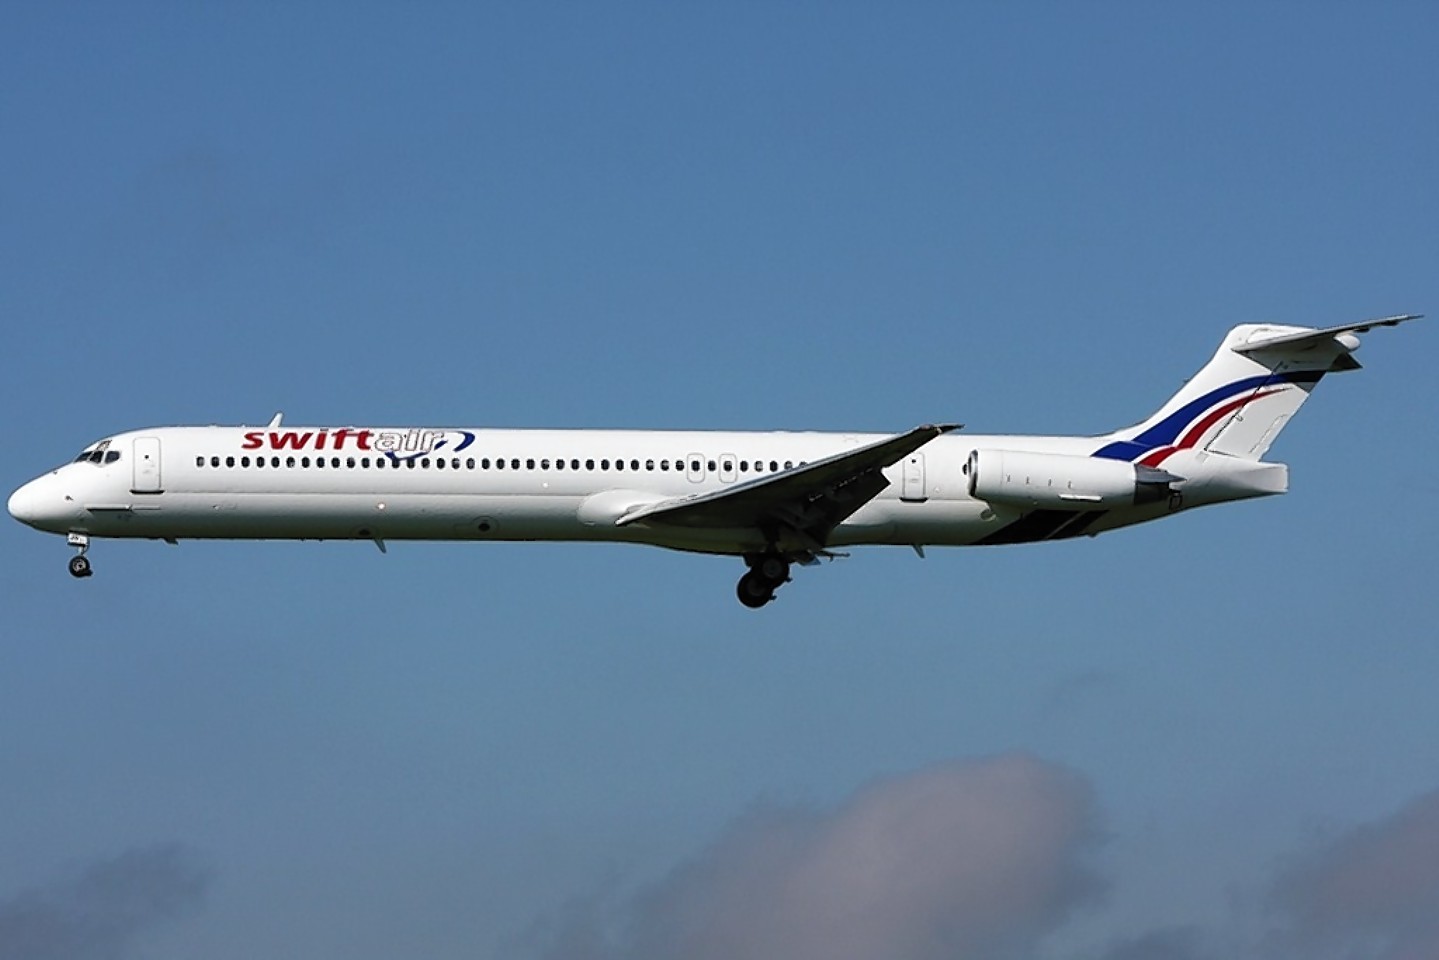 An Air Algerie plane similar to the one that has gone missing